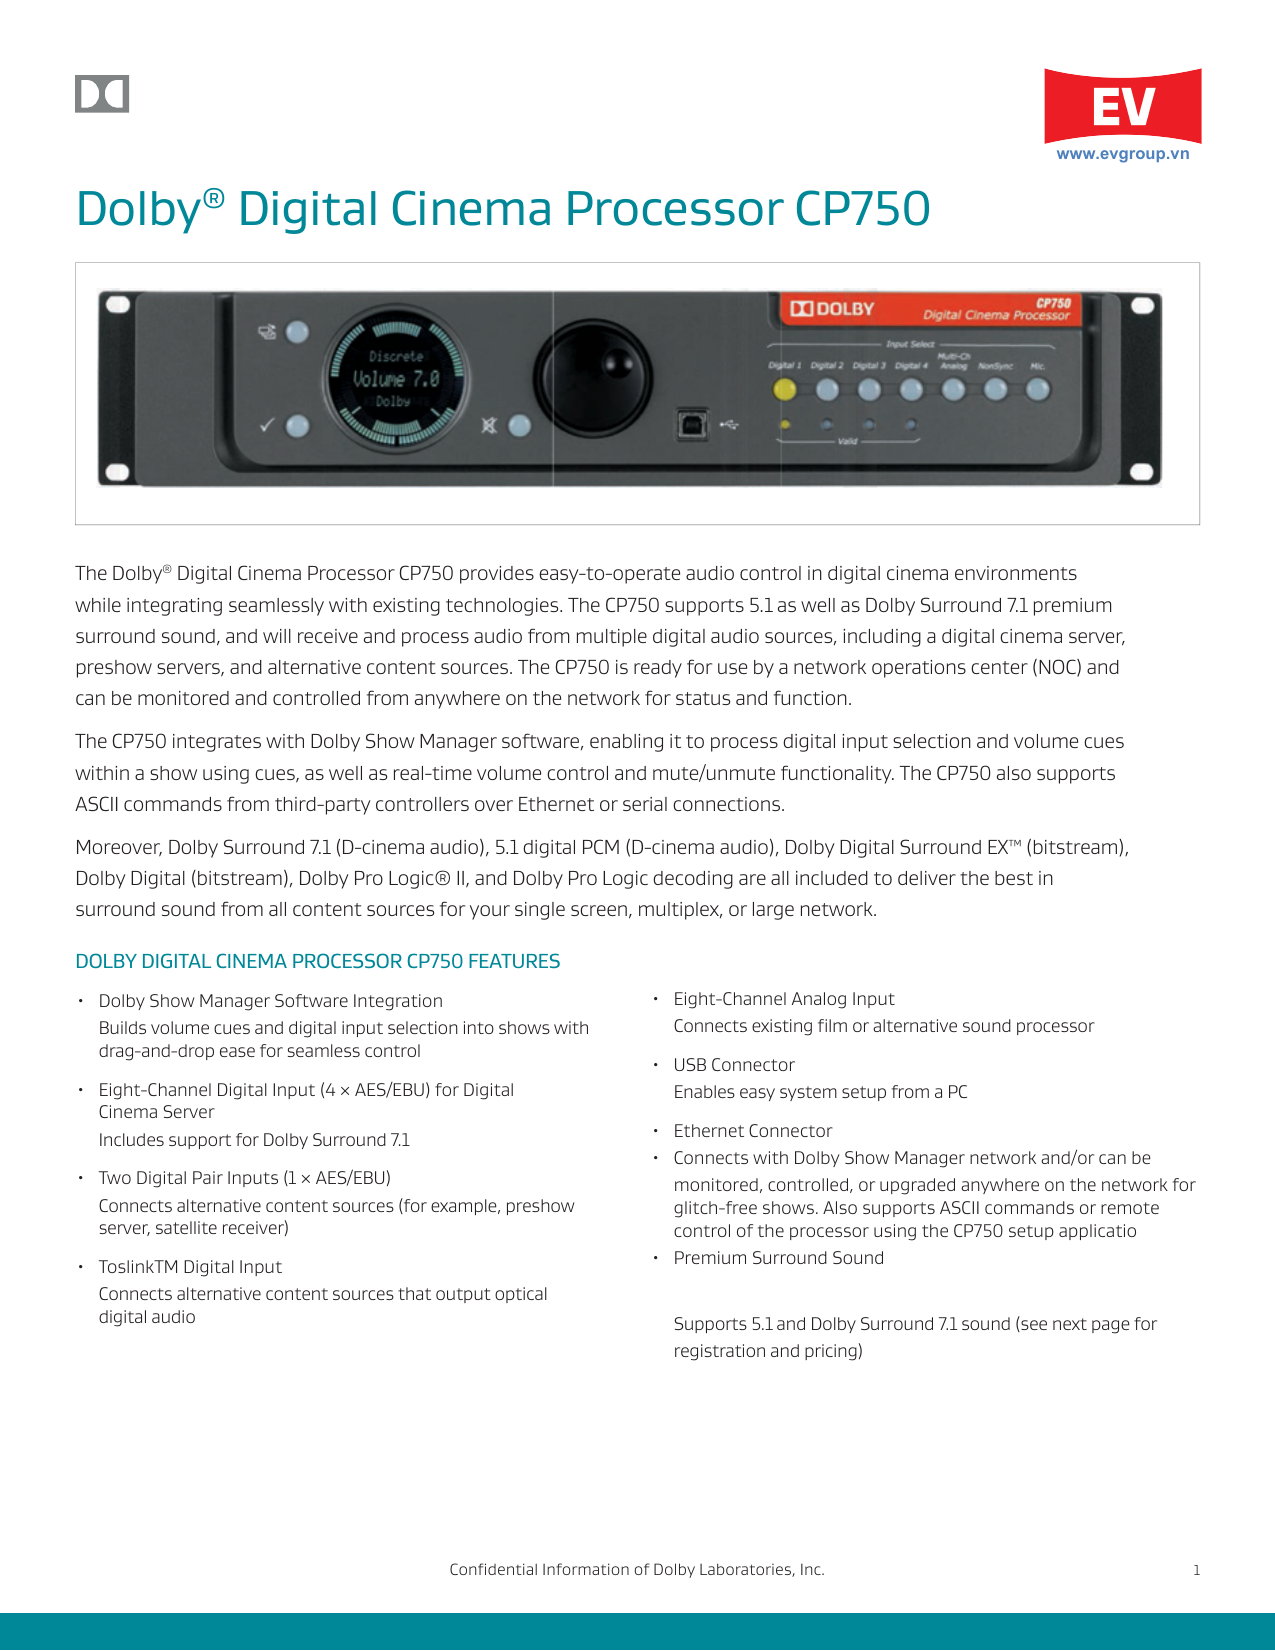 does spectrum choice have dolby 5.1